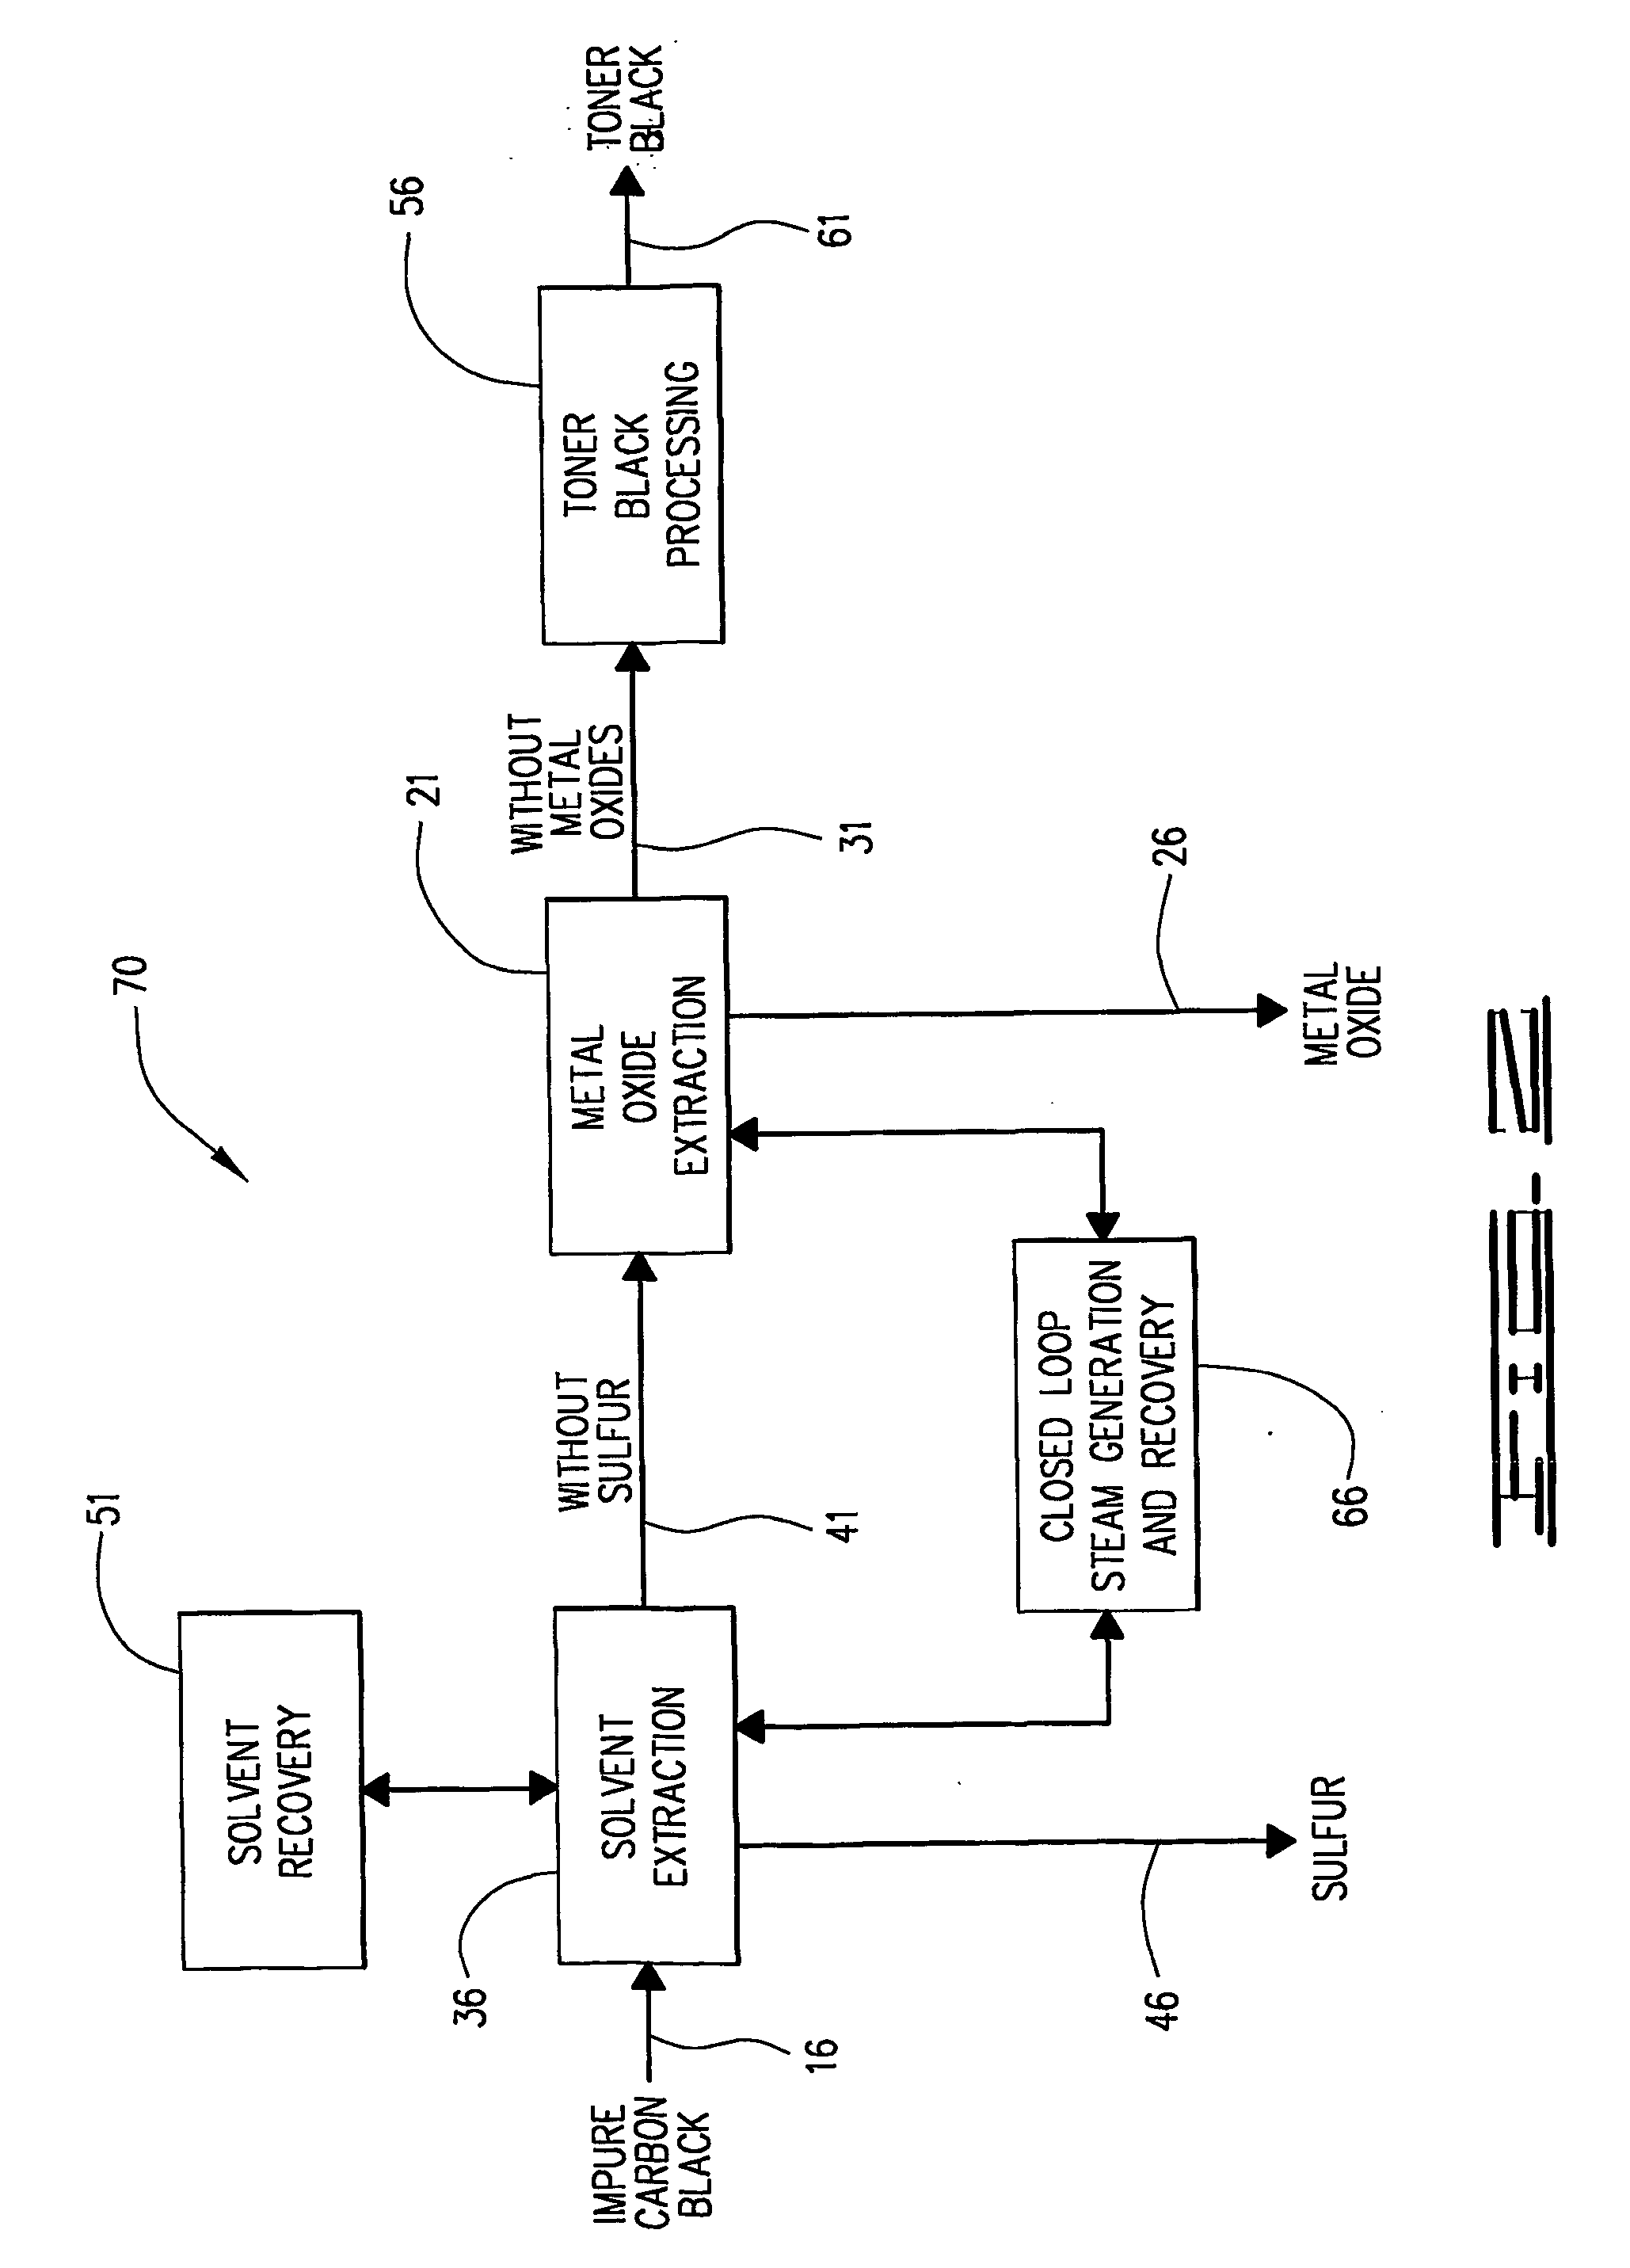 Apparatus and method for recovering carbon black from pyrolysis byproducts